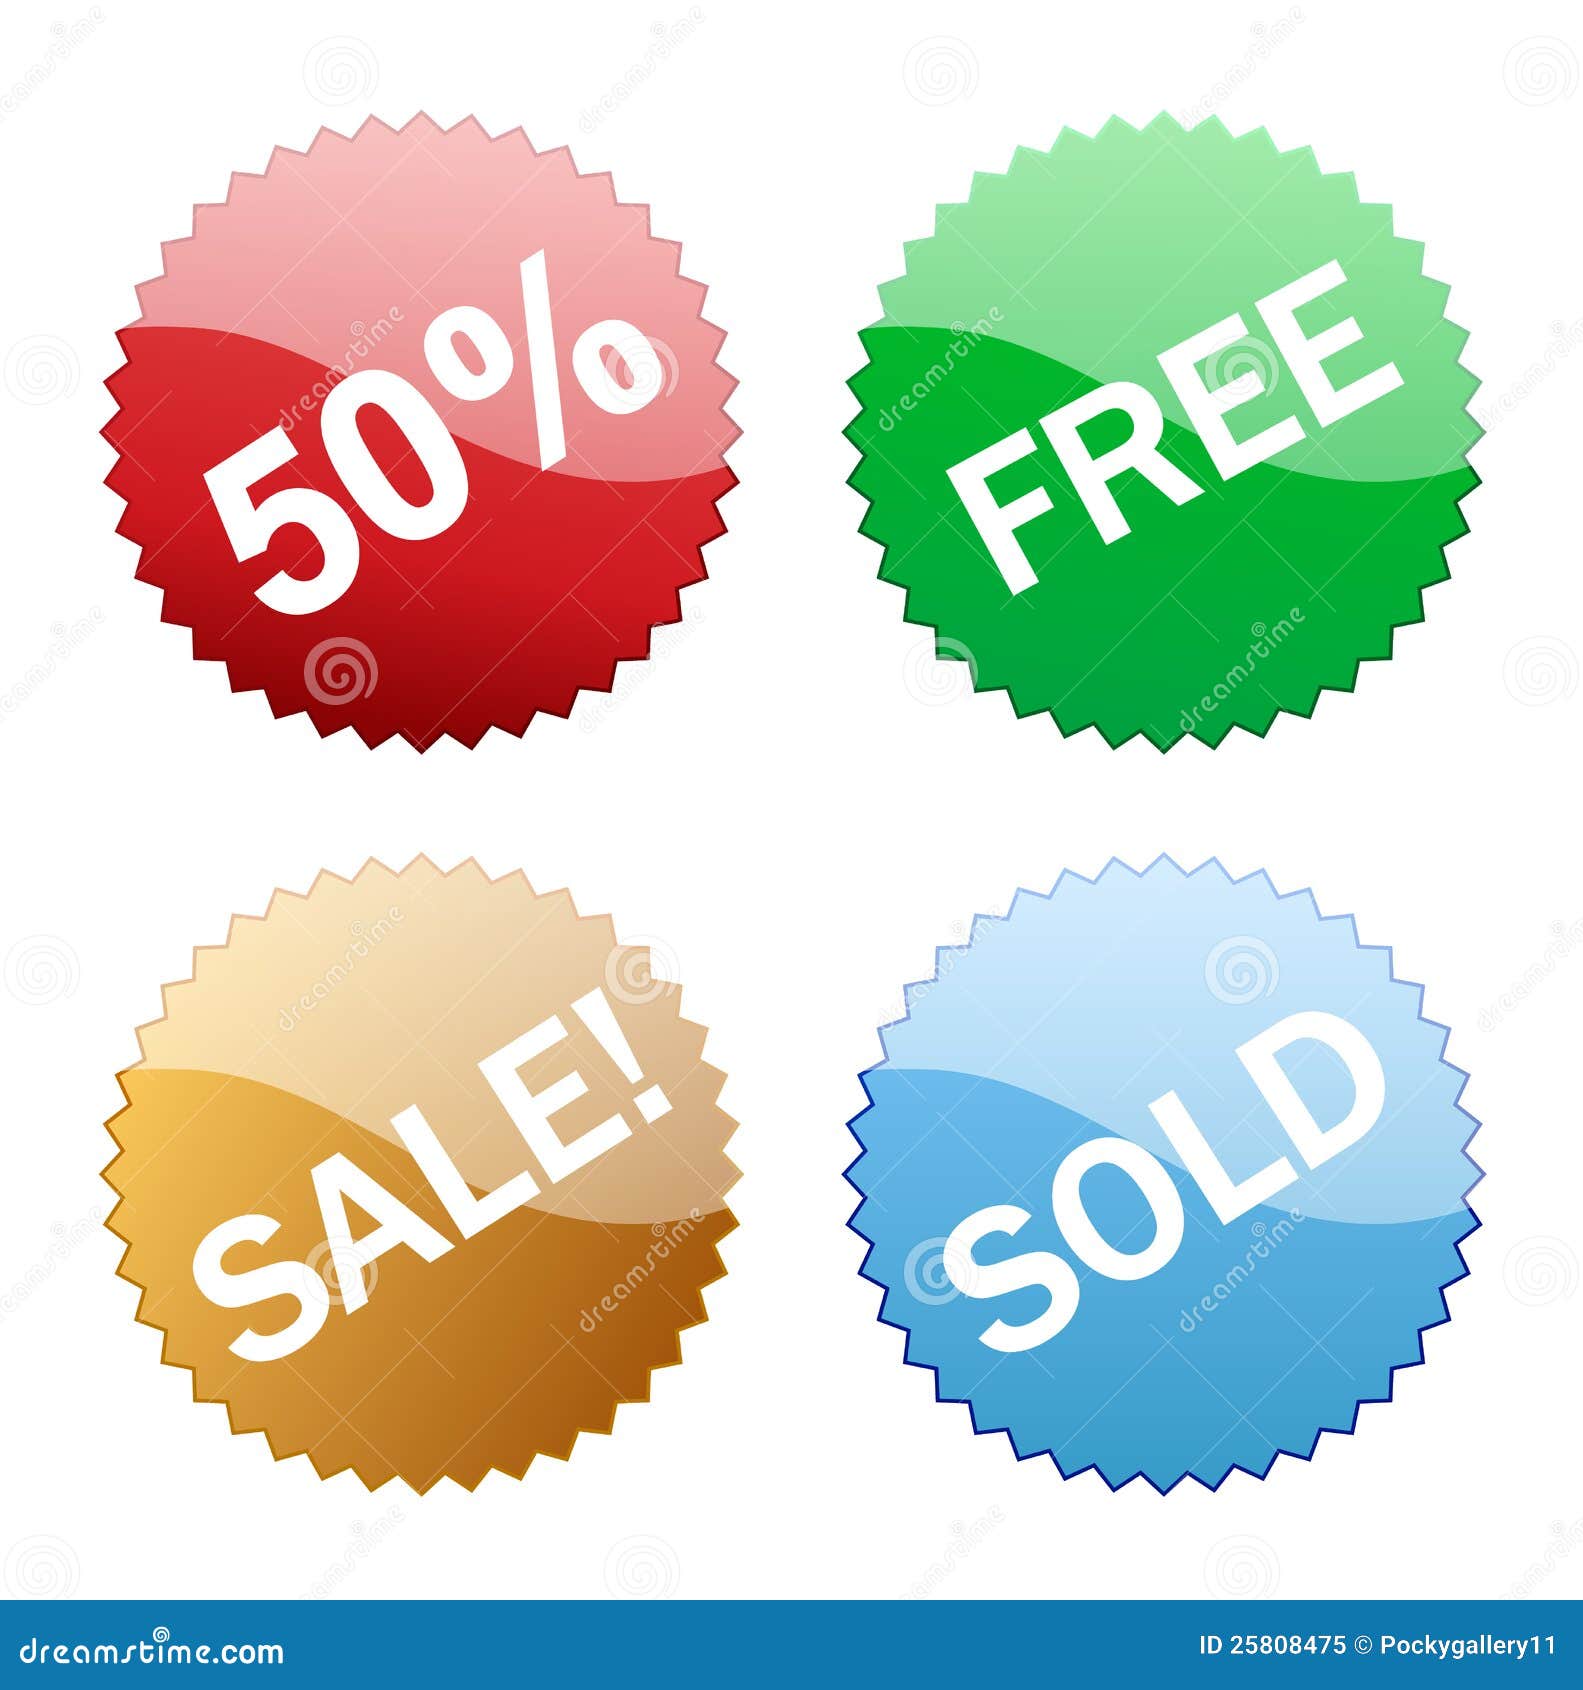 Sales Glossy Button Icon Royalty Free Stock Photo - Image ...